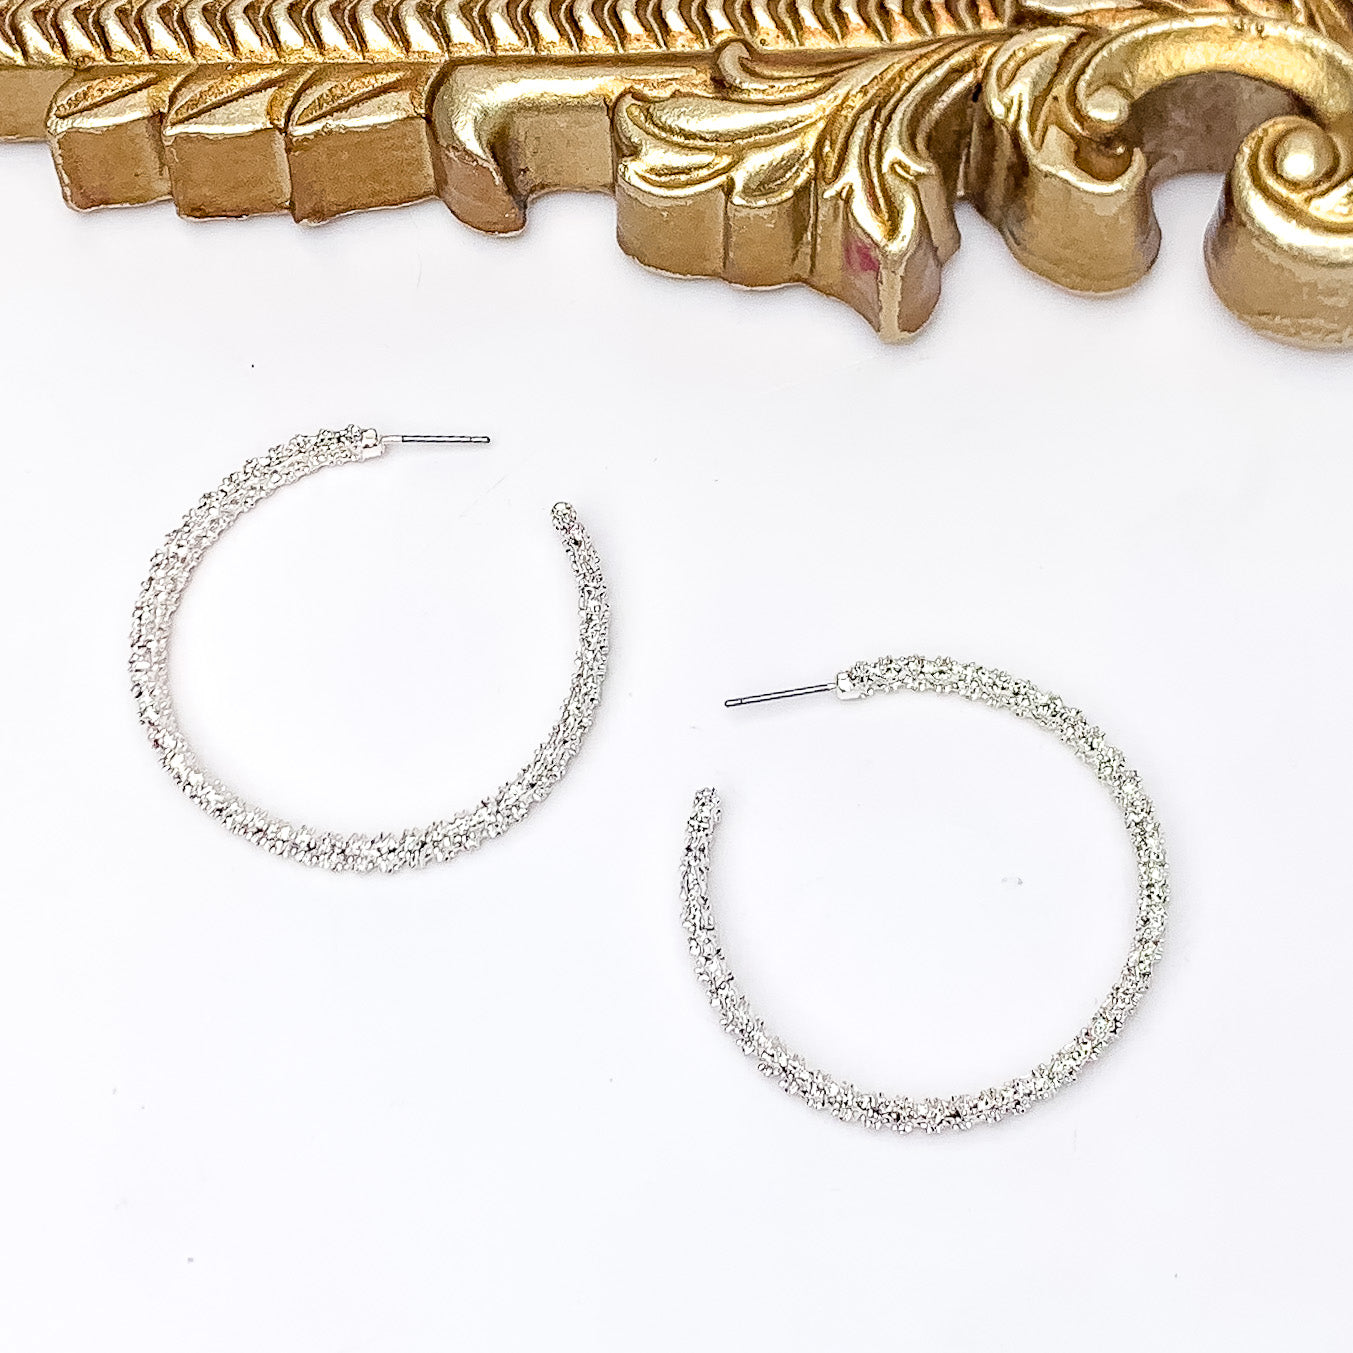 Worry Free Large Silver Tone Textured Hoop Earrings - Giddy Up Glamour Boutique